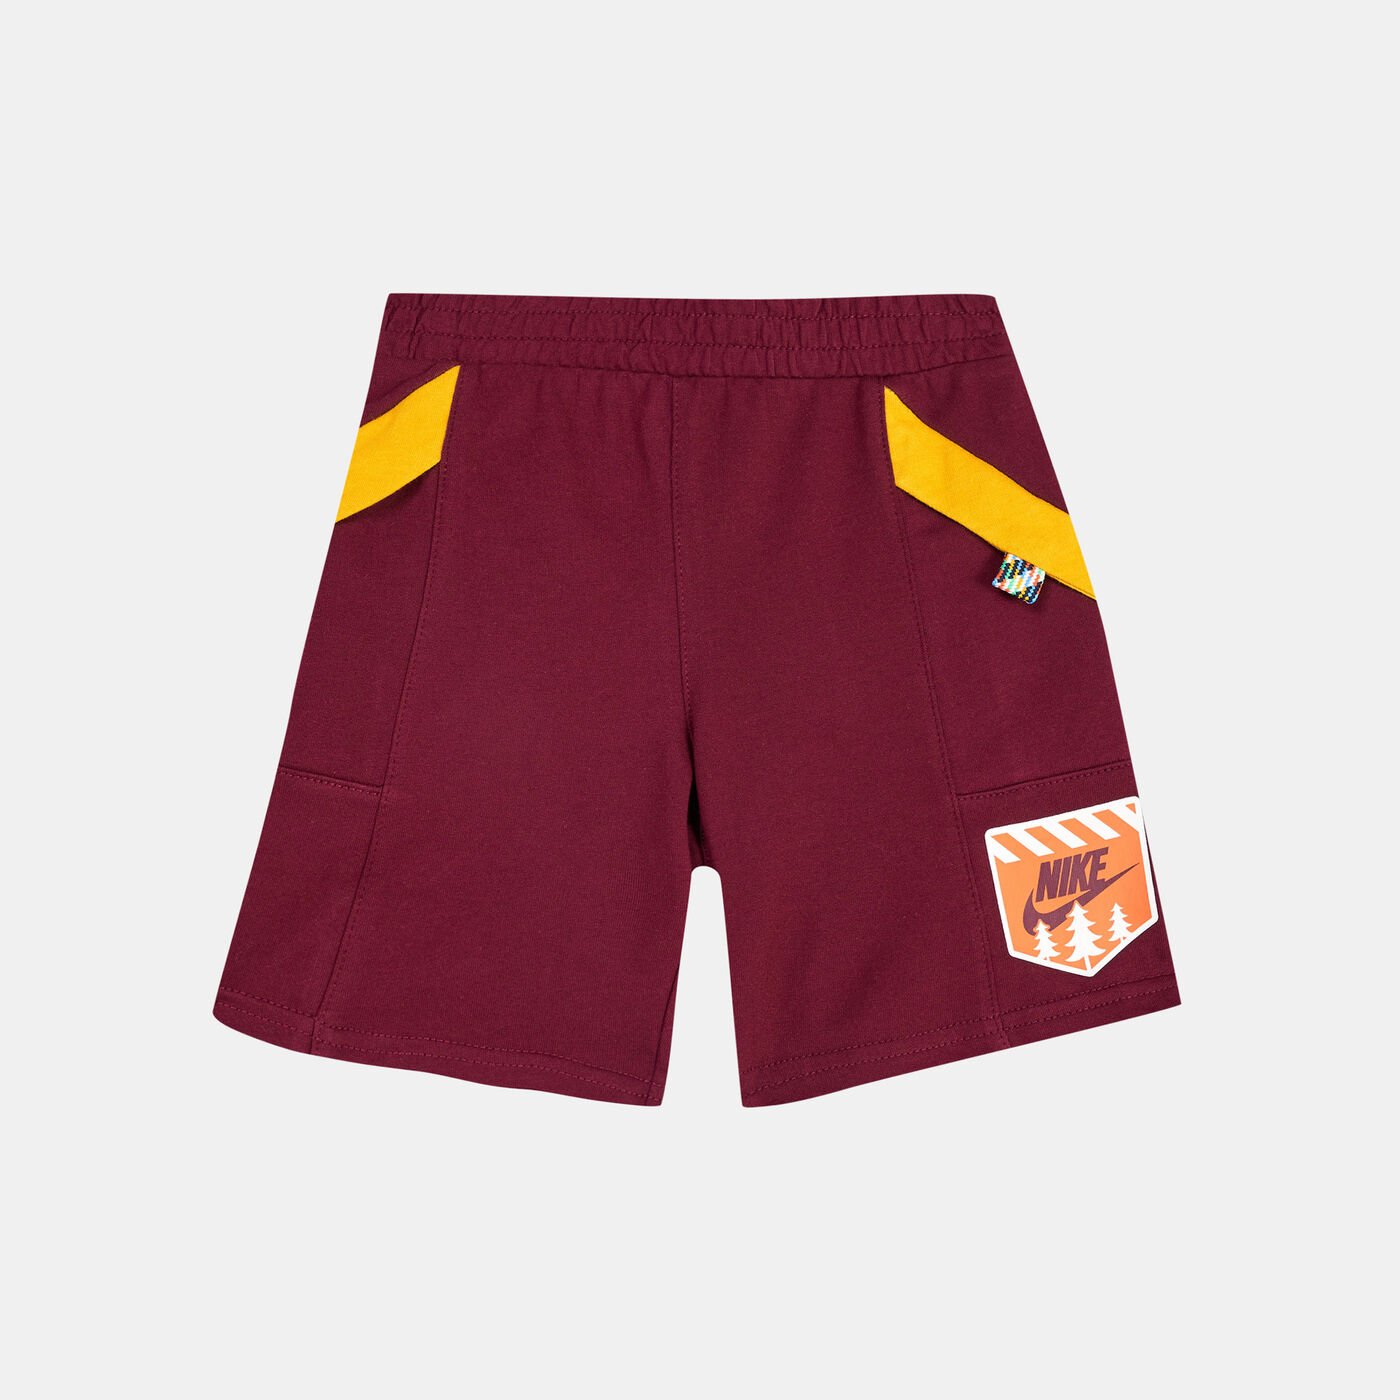 Kids' Great Outdoors Shorts